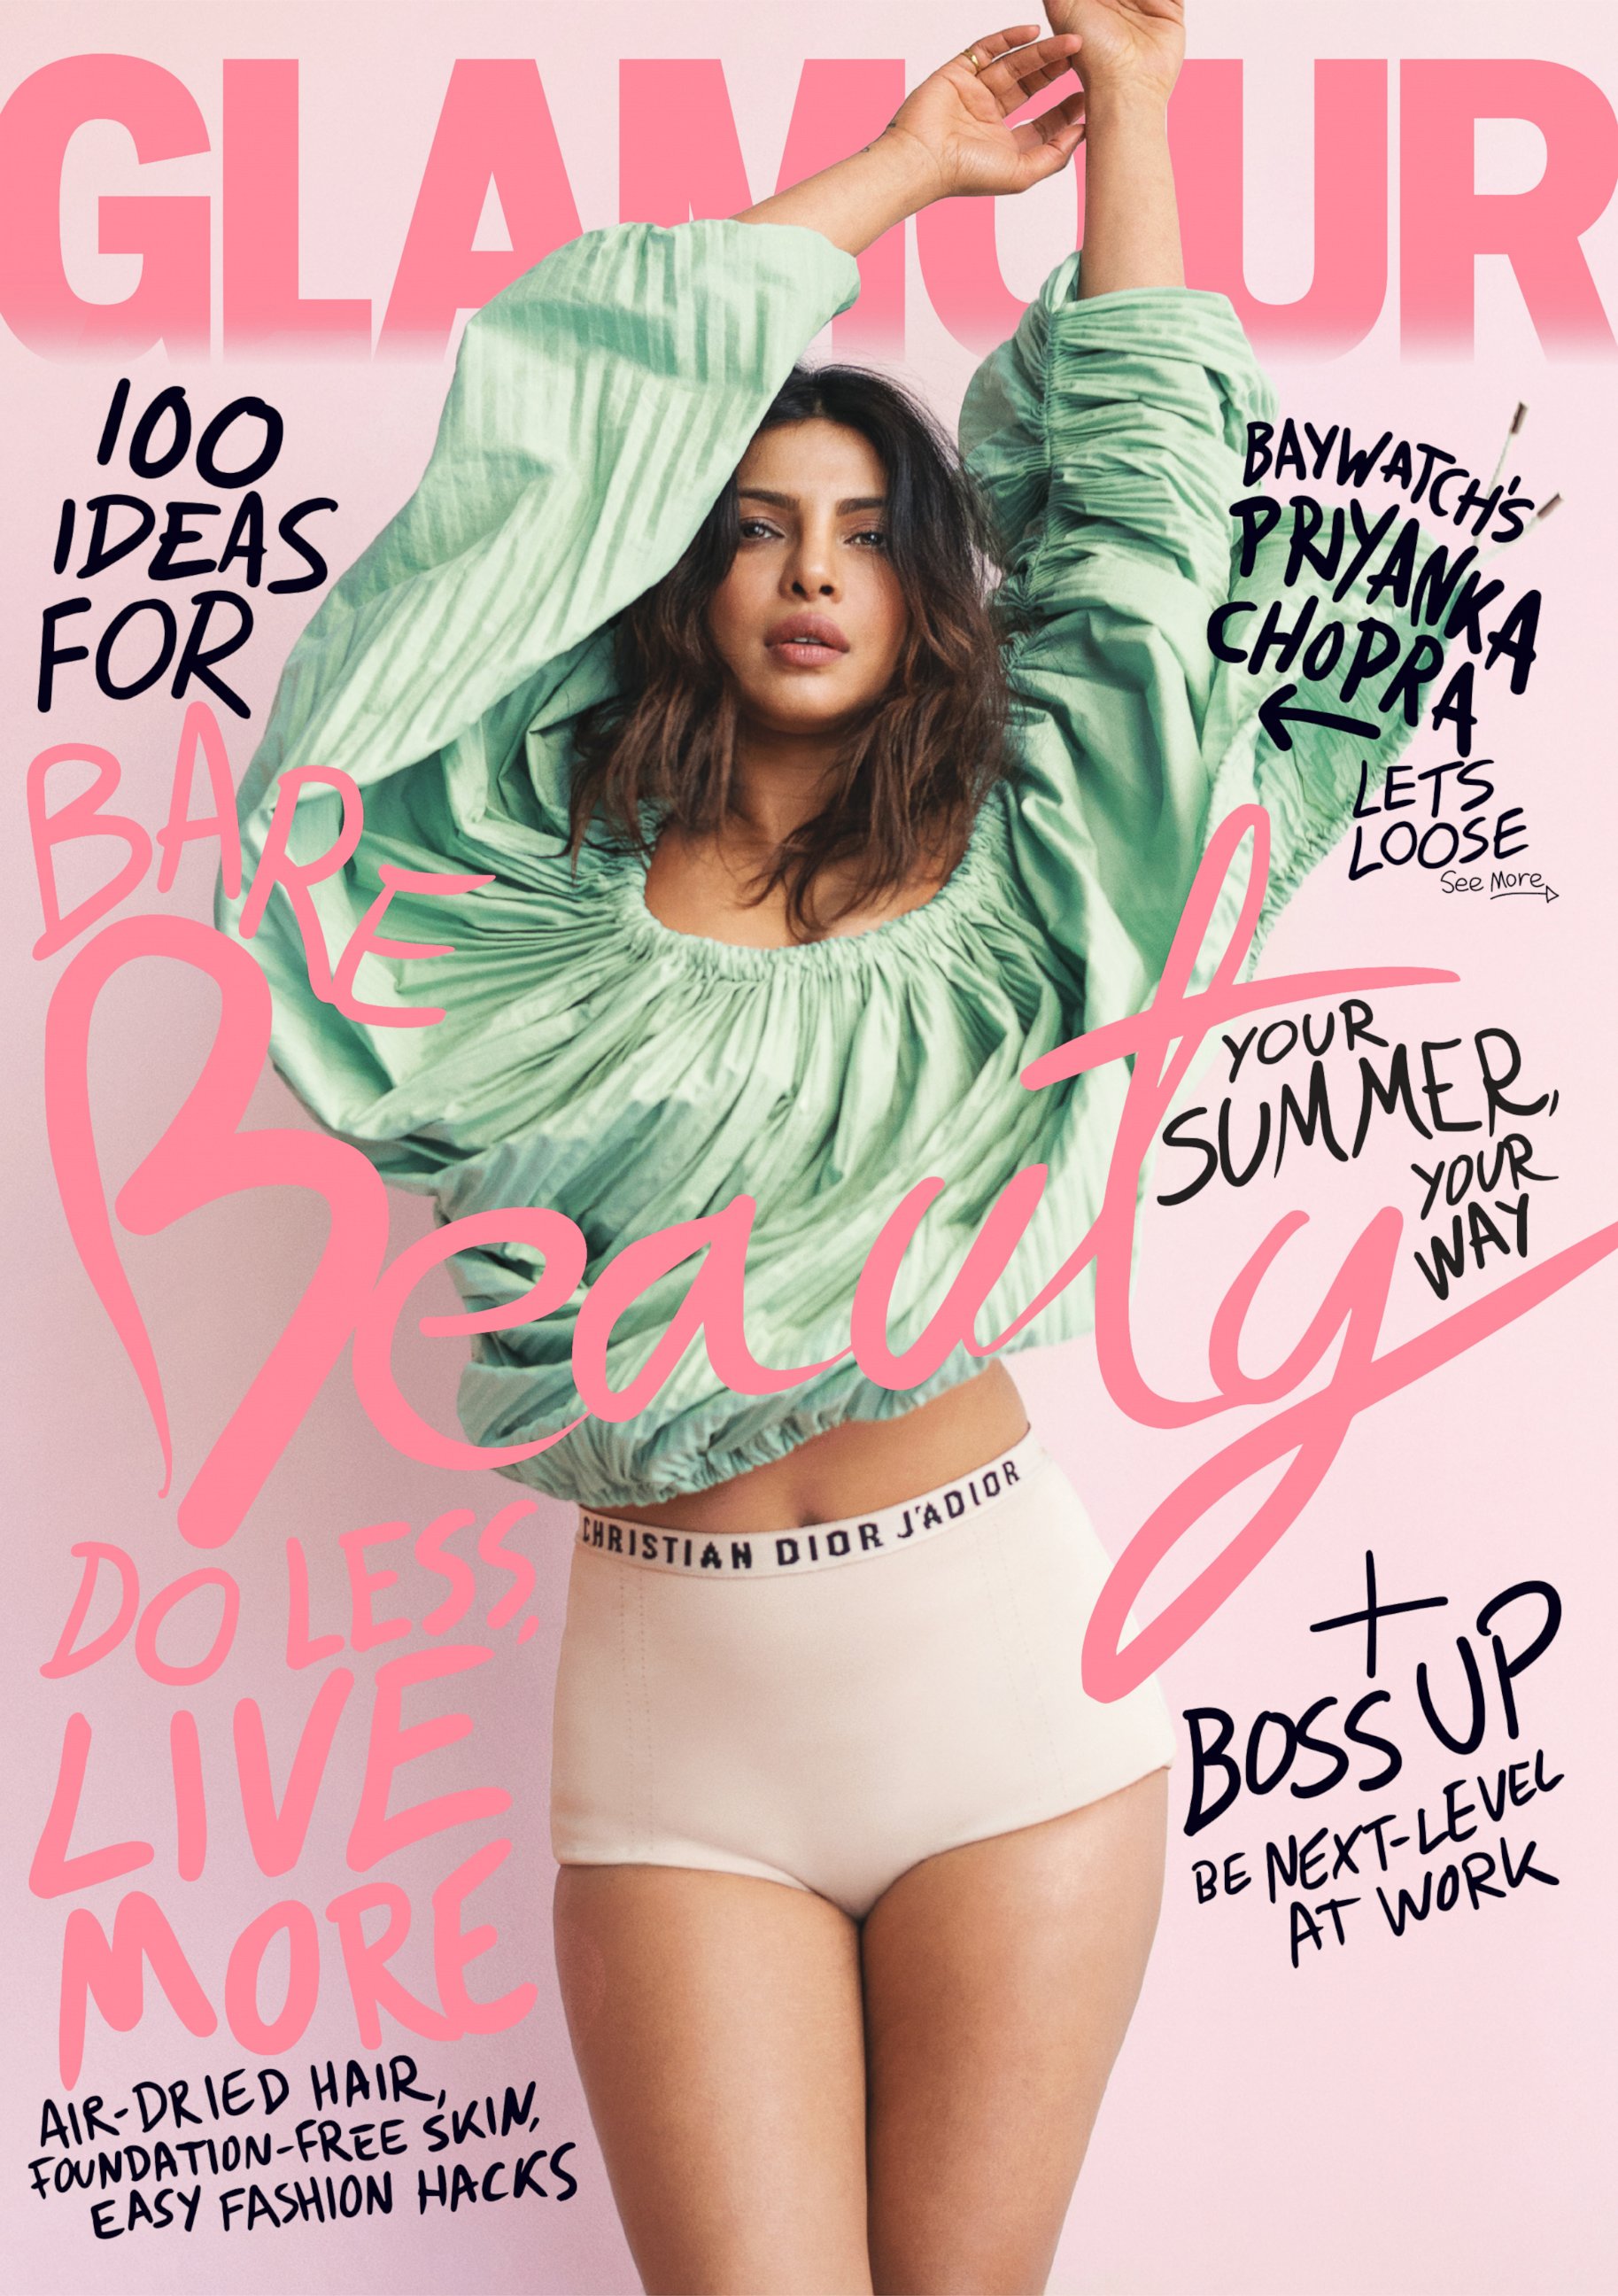 PHOTO: Priyanka Chopra is featured on the cover of Glamour magazine's June 2017 cover.